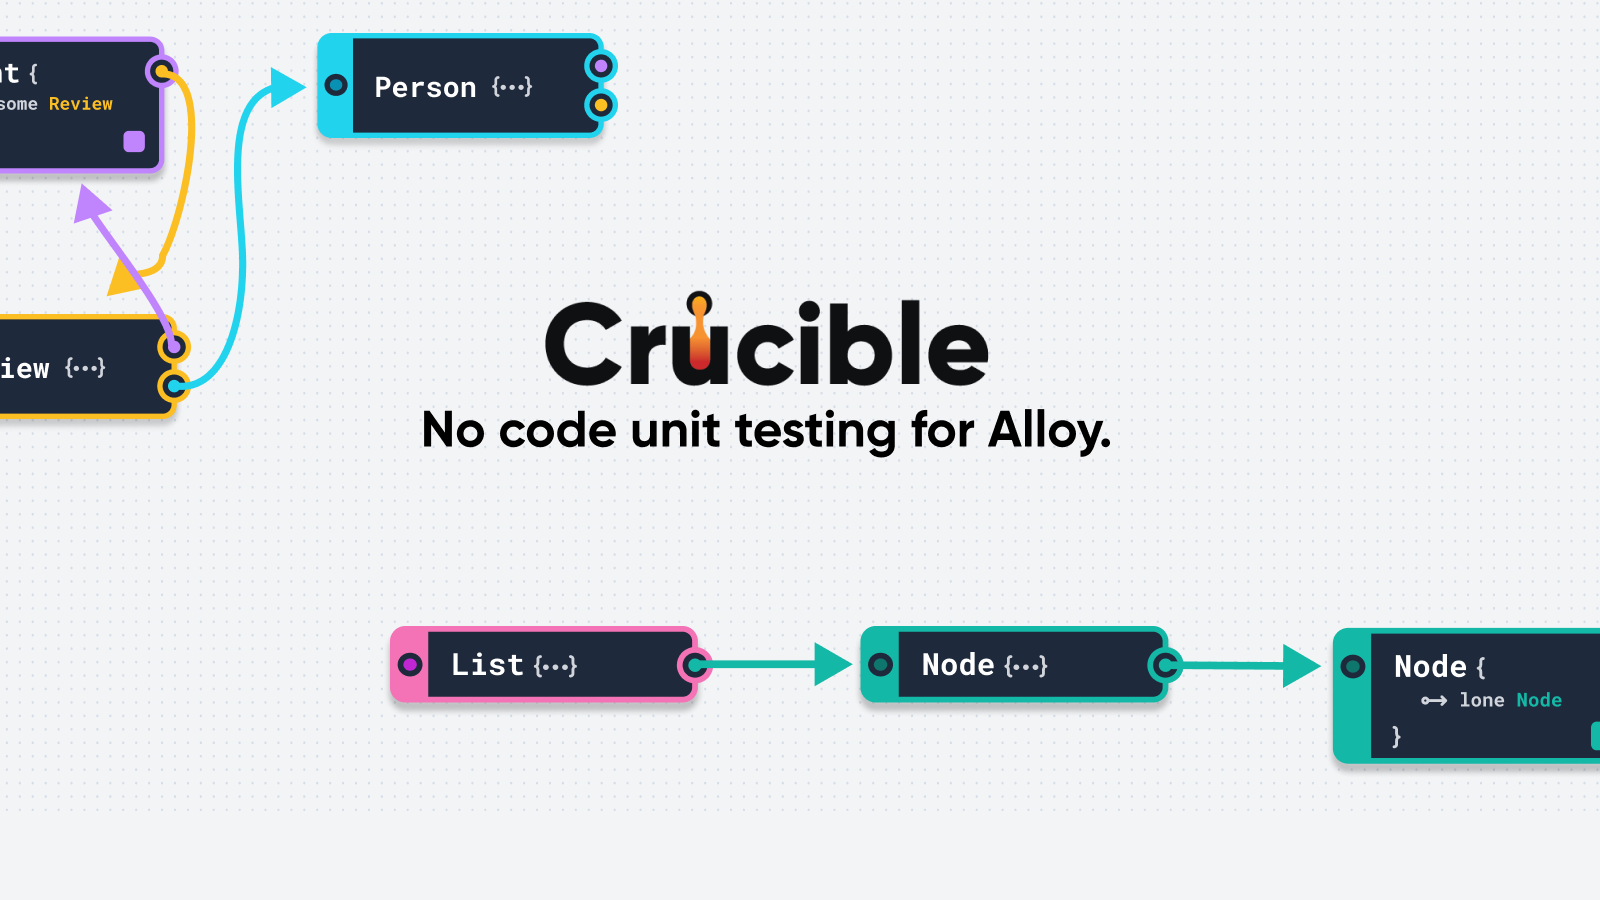 Crucible, No Code Unit Testing for Alloy